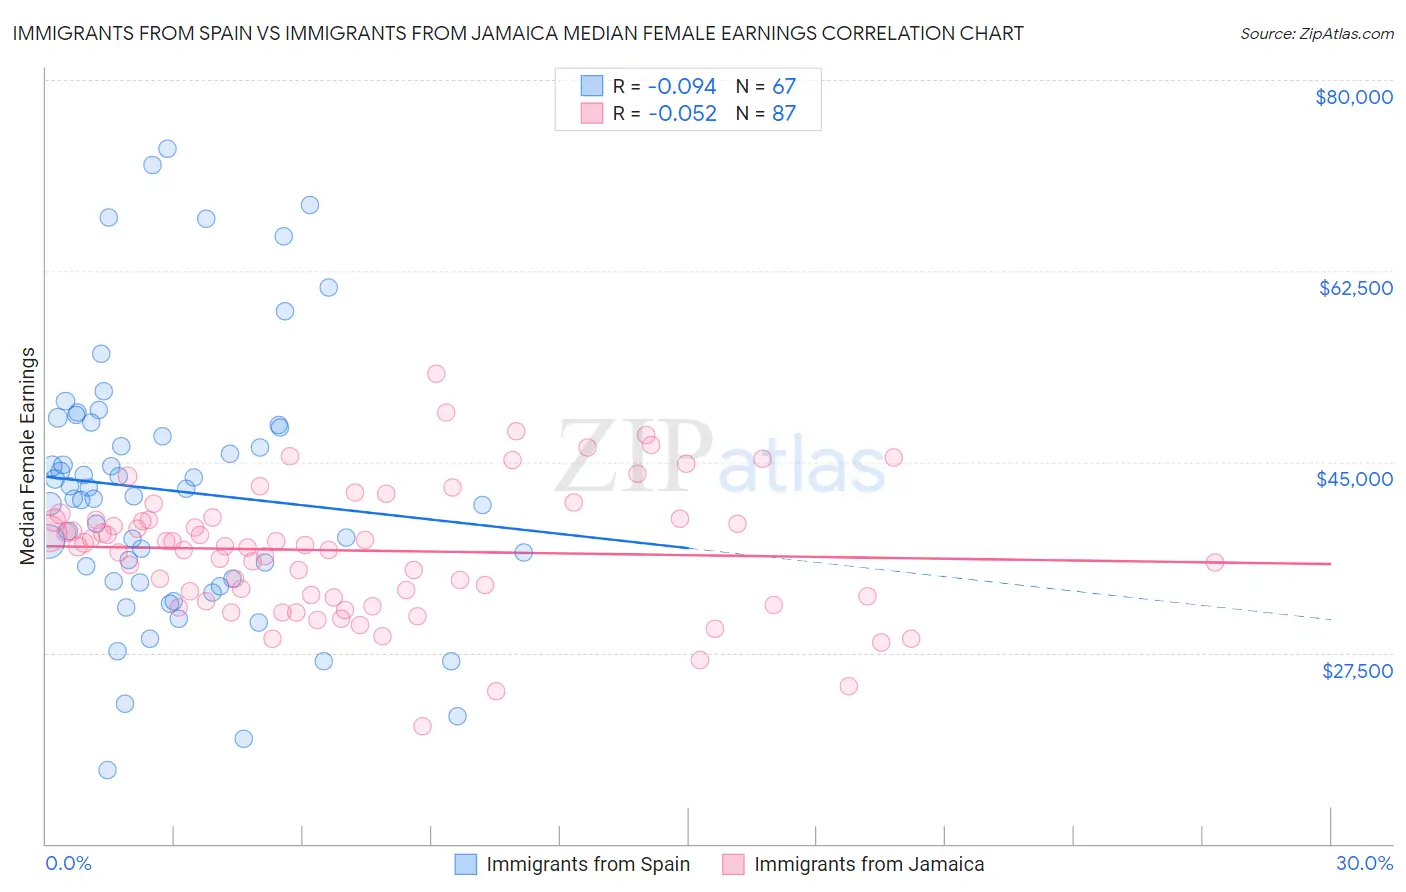 Immigrants from Spain vs Immigrants from Jamaica Median Female Earnings